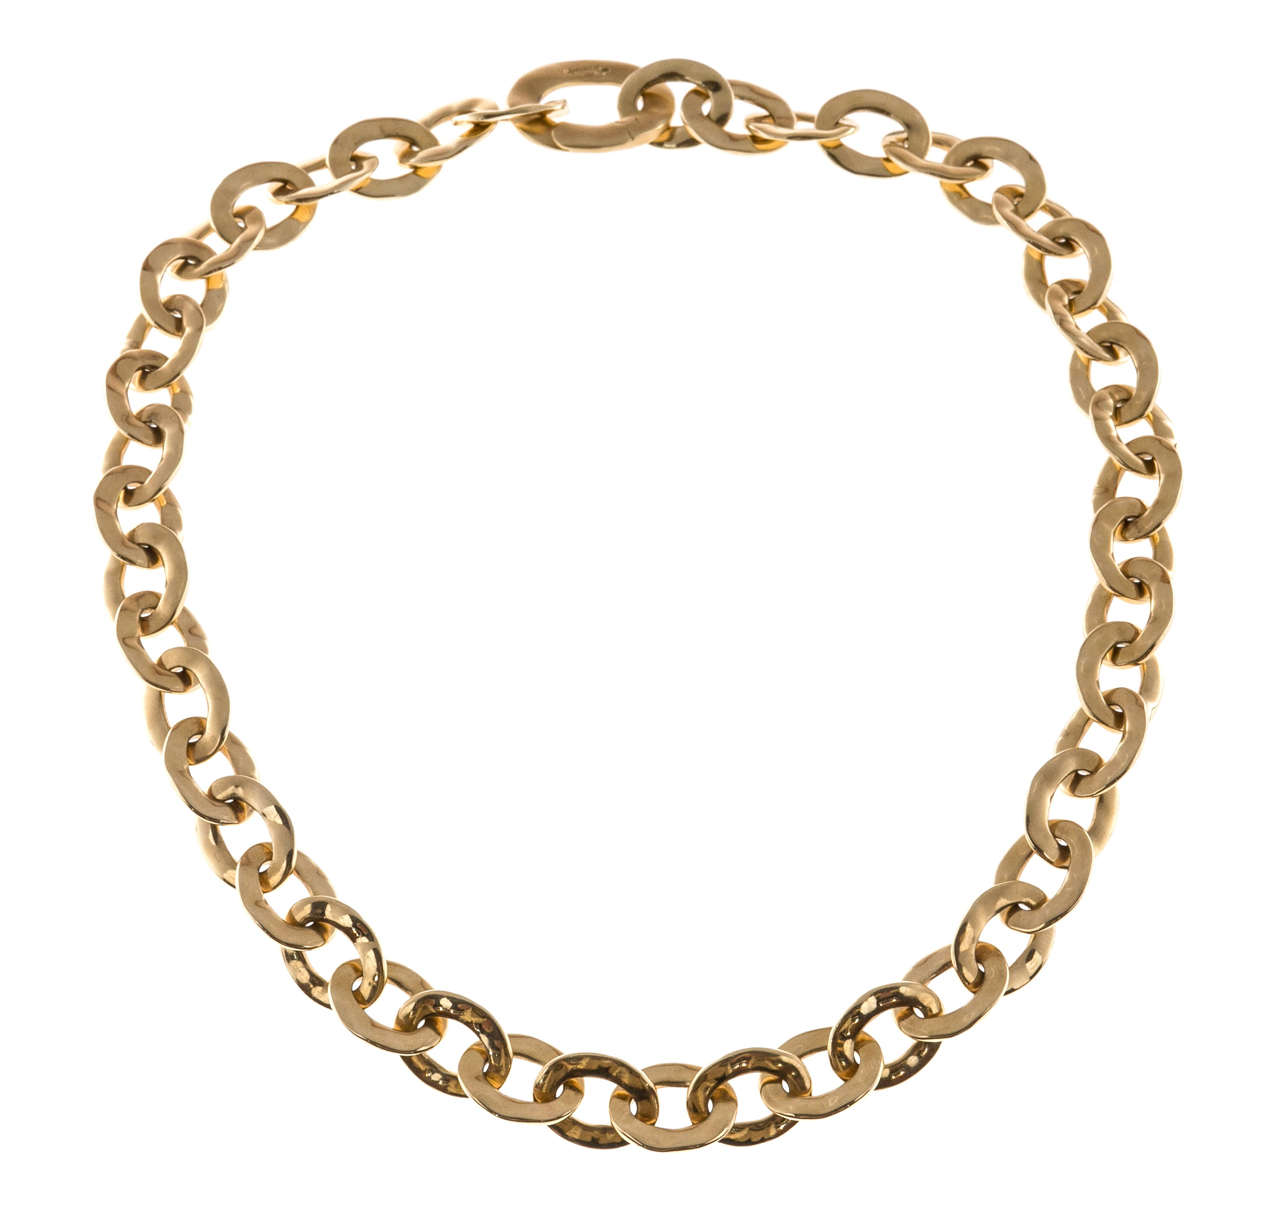 Authentic Pomellato solid textured graduated oval 18k yellow gold  link 17 inch necklace. Large textured link hinged open as a catch.

18k Yellow gold Oval link necklace 11.88 to 17.64mm
Tested: 18k
Stamped: 750
Hallmark: Pomellato
Length: 17